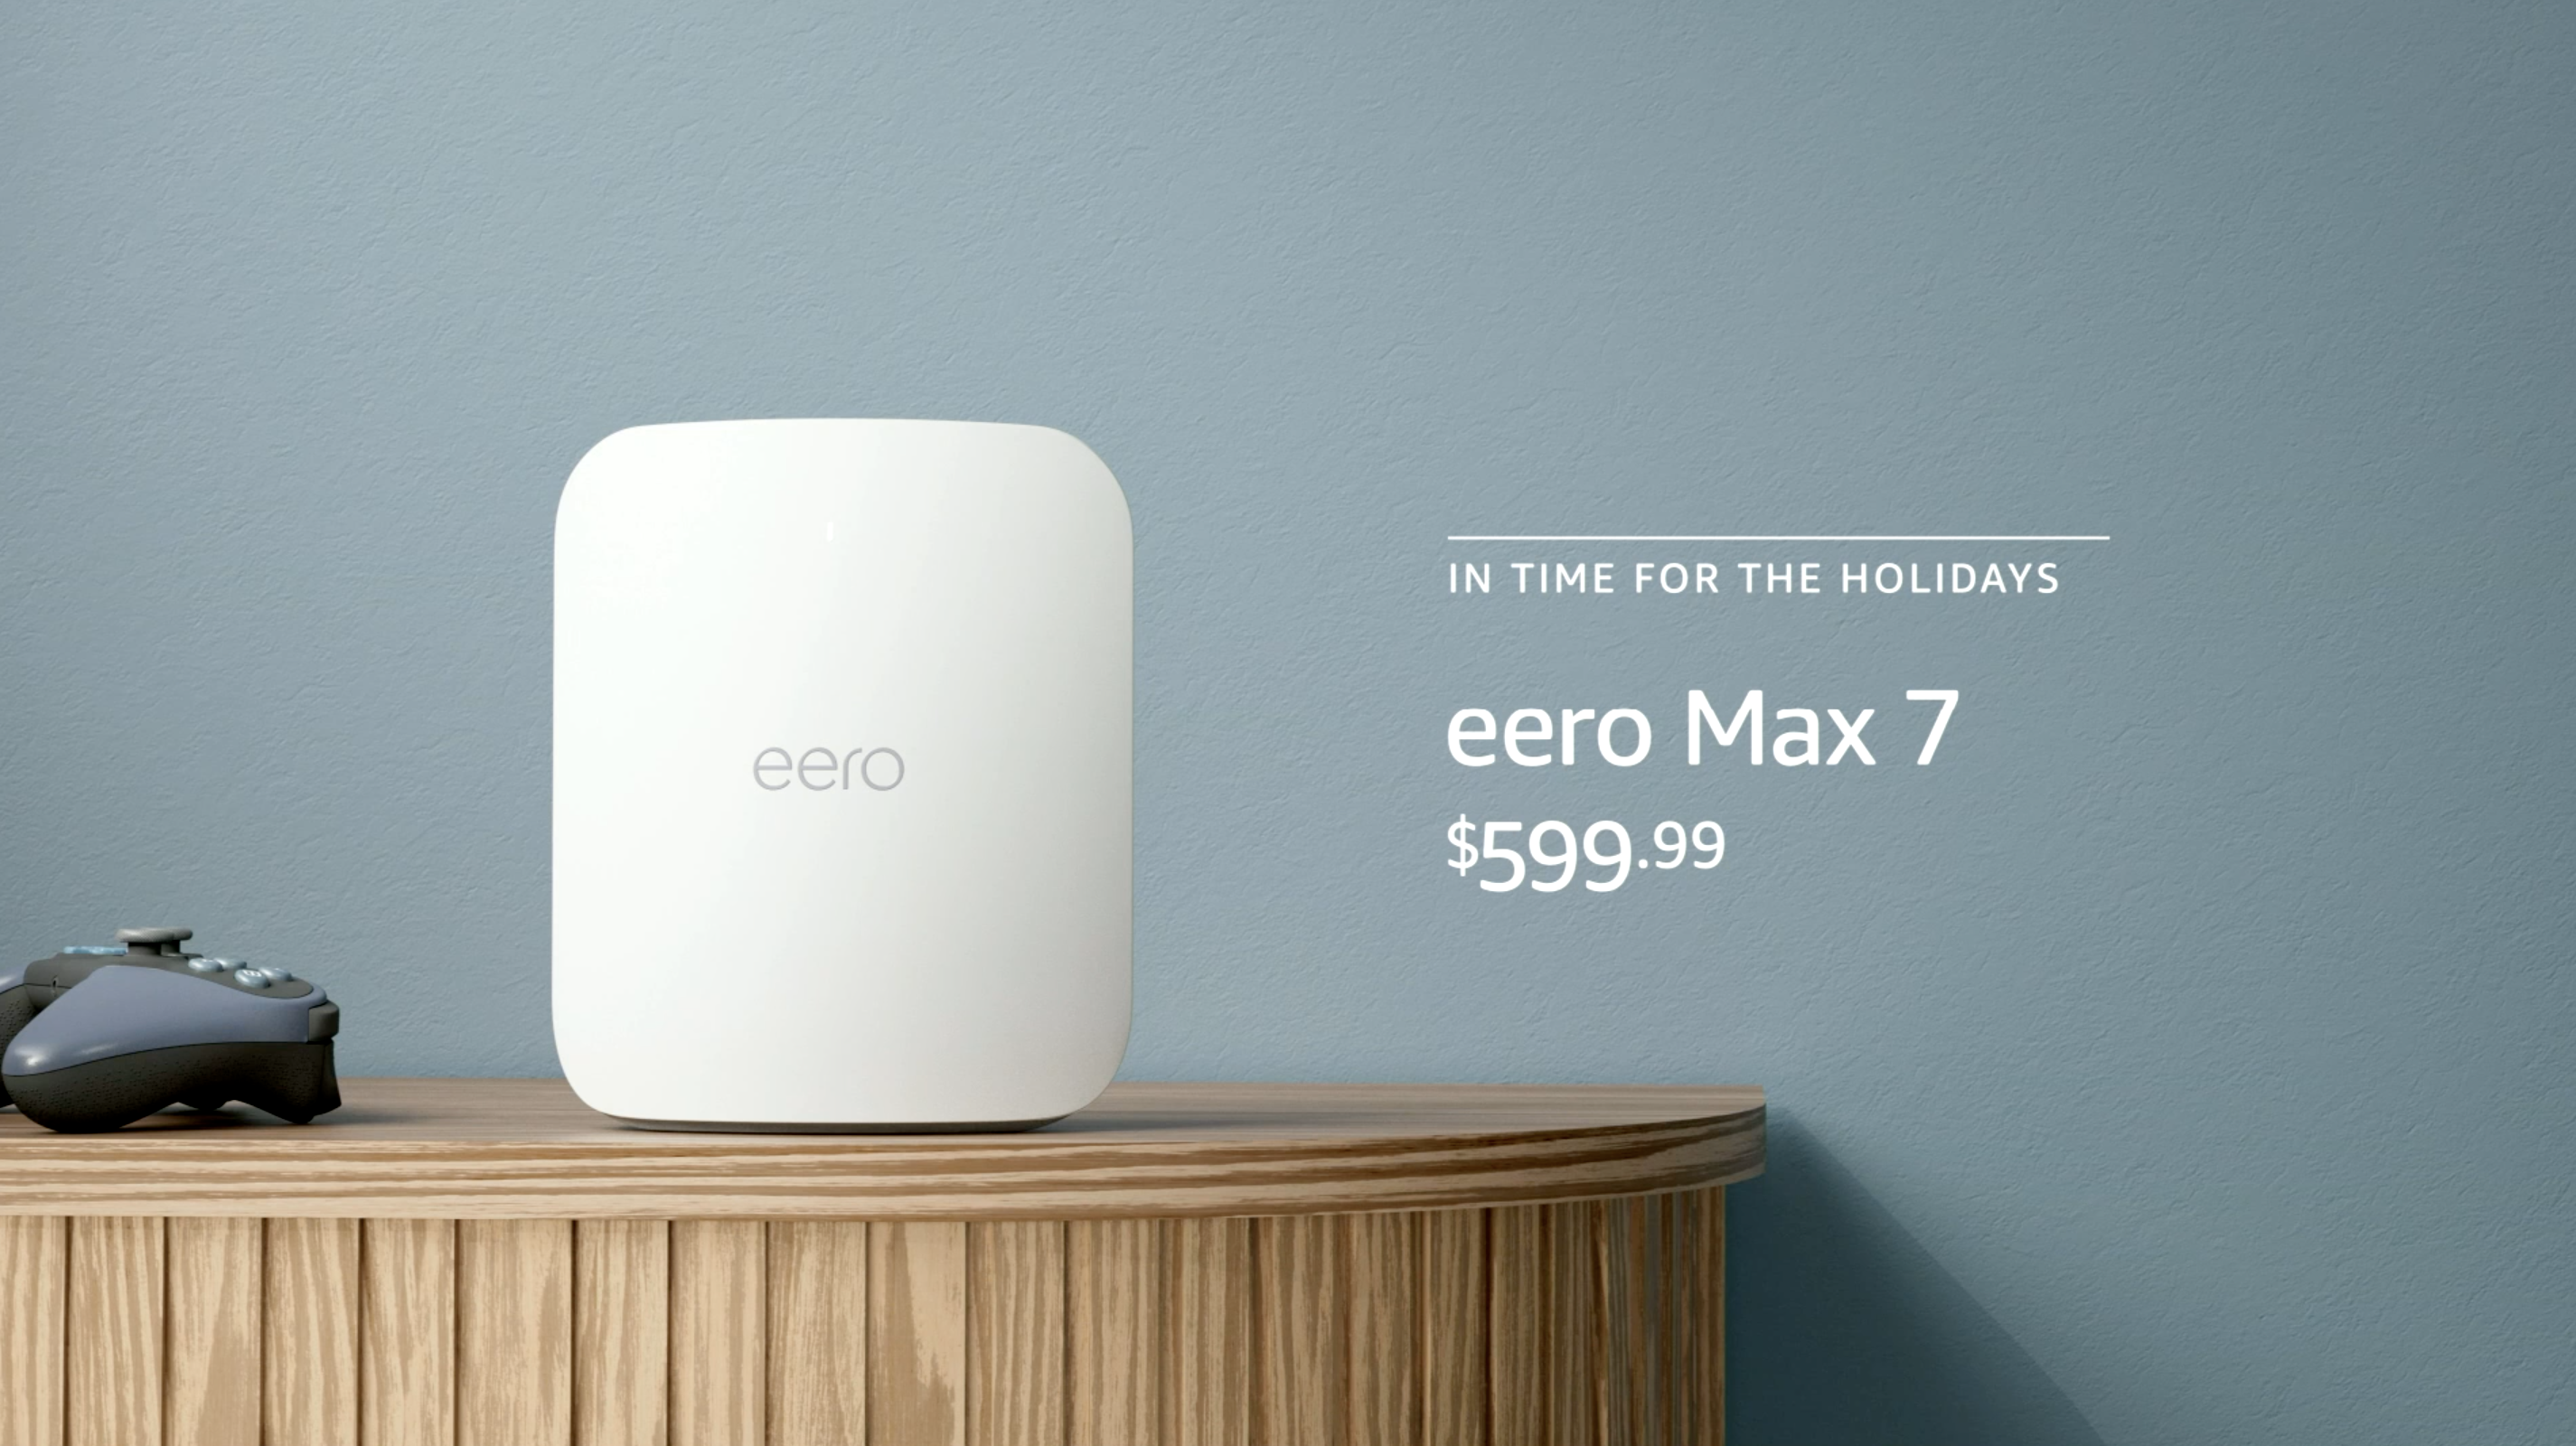 The eero Max 7 router on a table